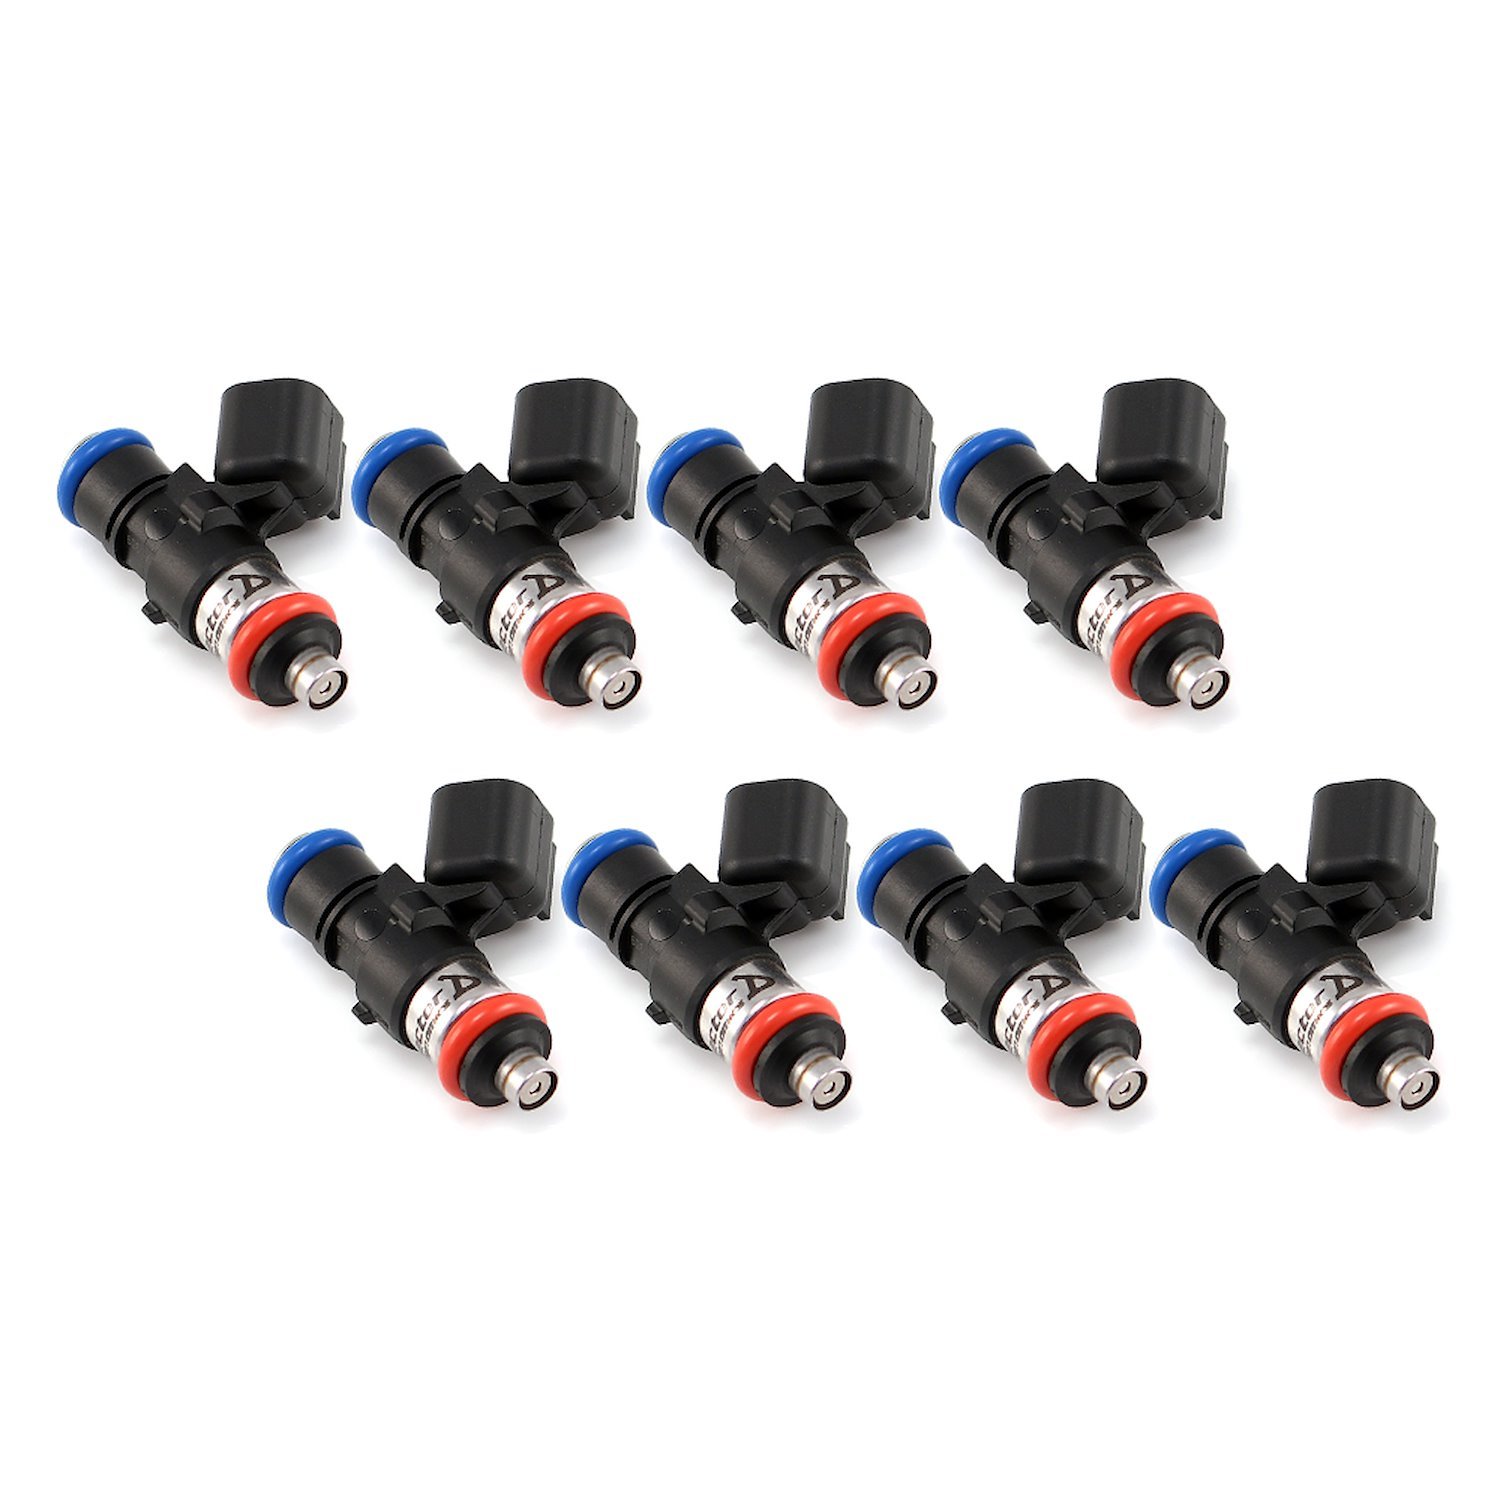 1300.34.14.15.8 1340cc Fuel Injector Set, 34 mm Length, No Adapt Top 14 mm O-Ring / 15 mm Lowrt O-Ring